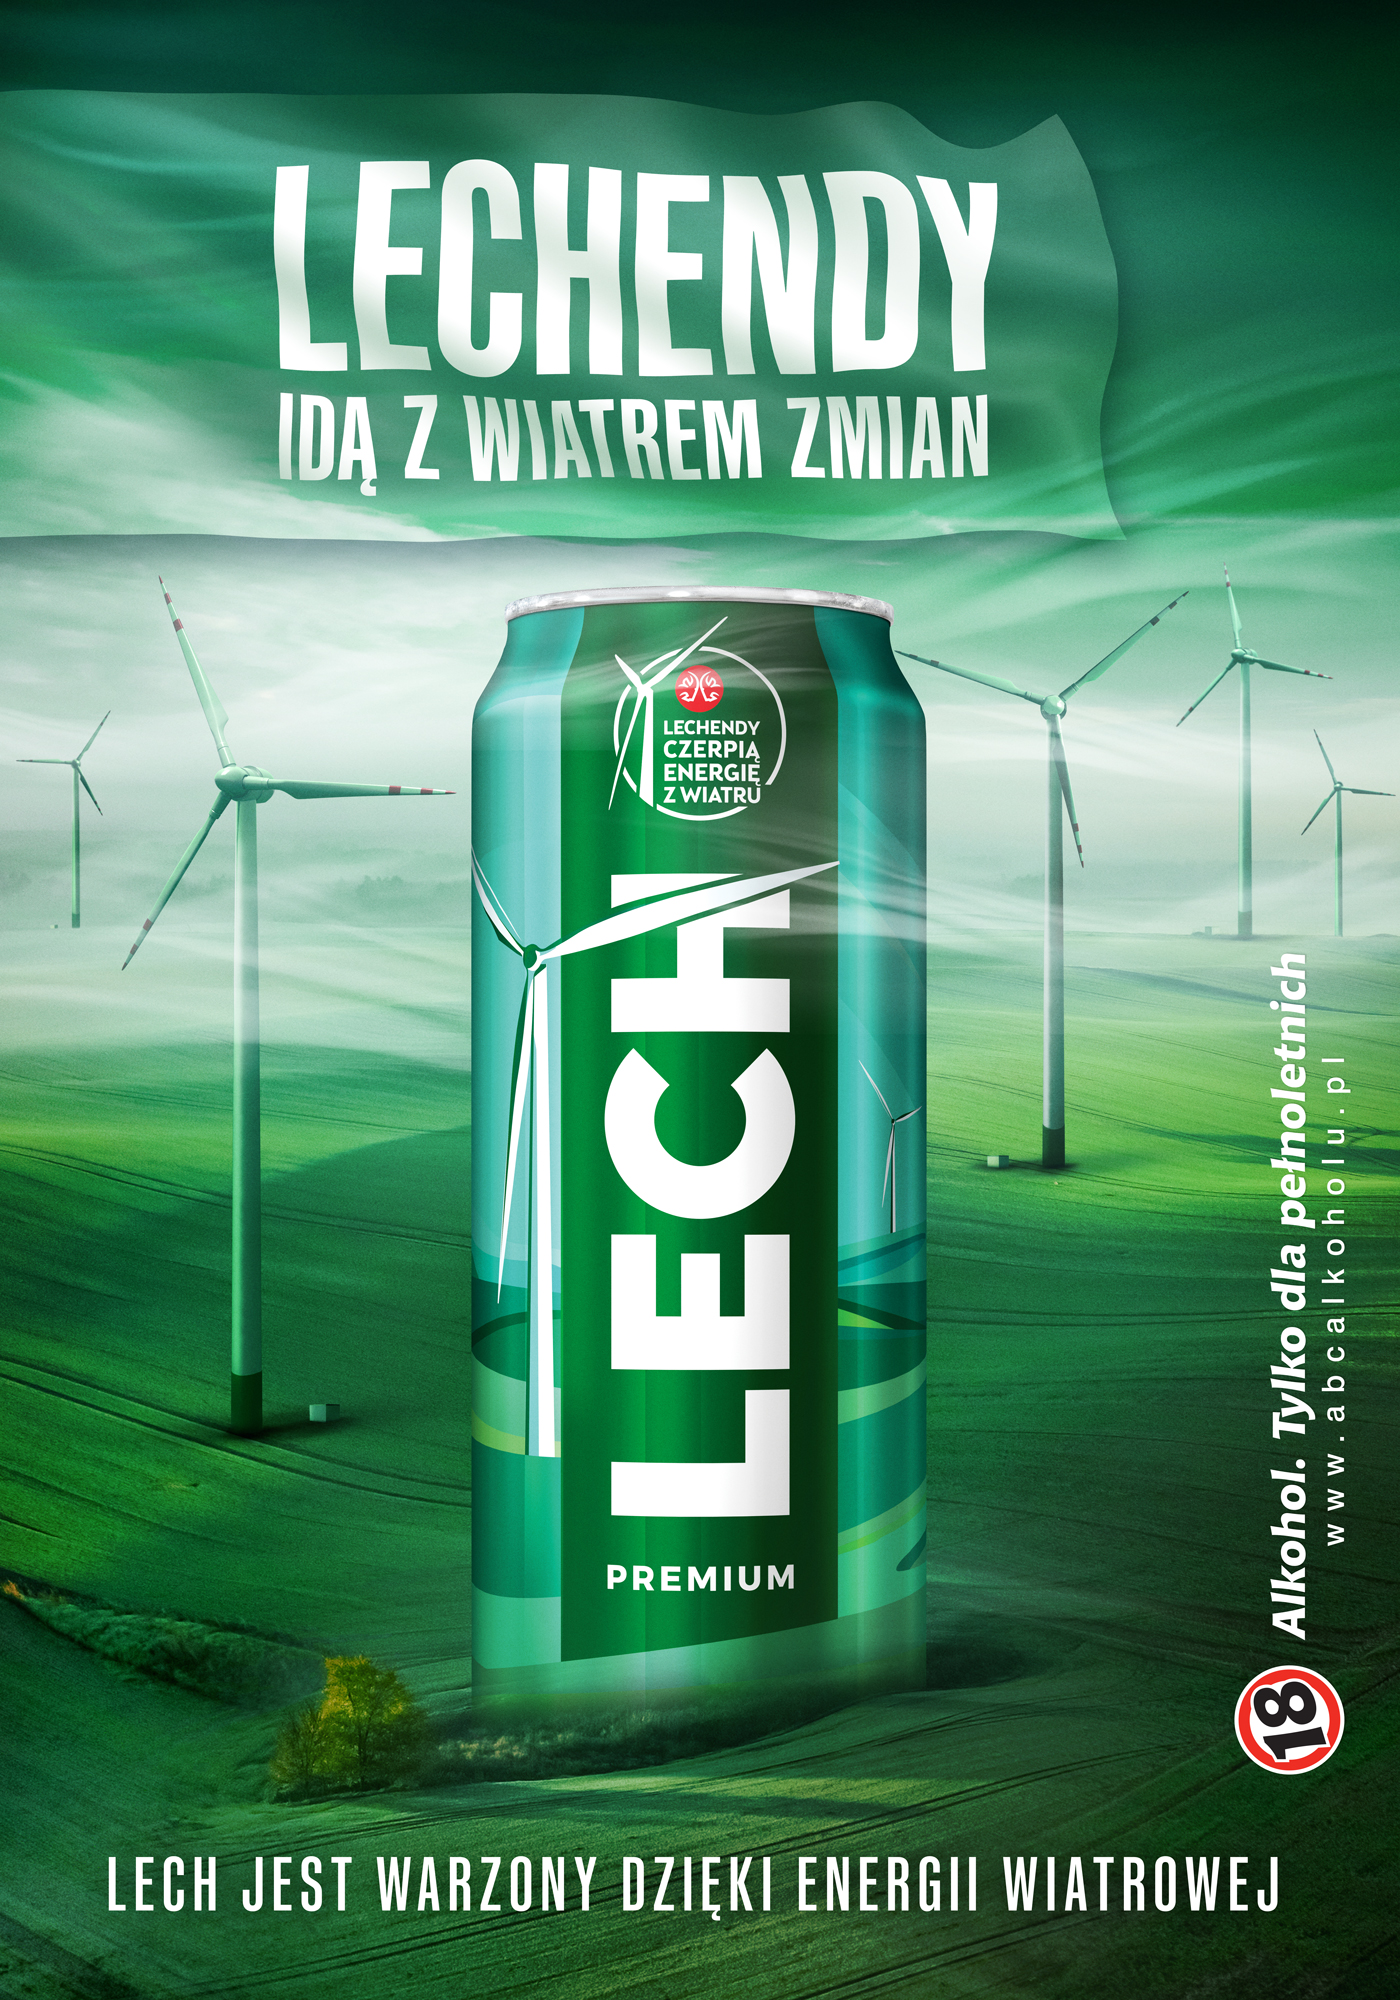 Lechends follow the winds of change! Lech is brewed with the use of wind energy